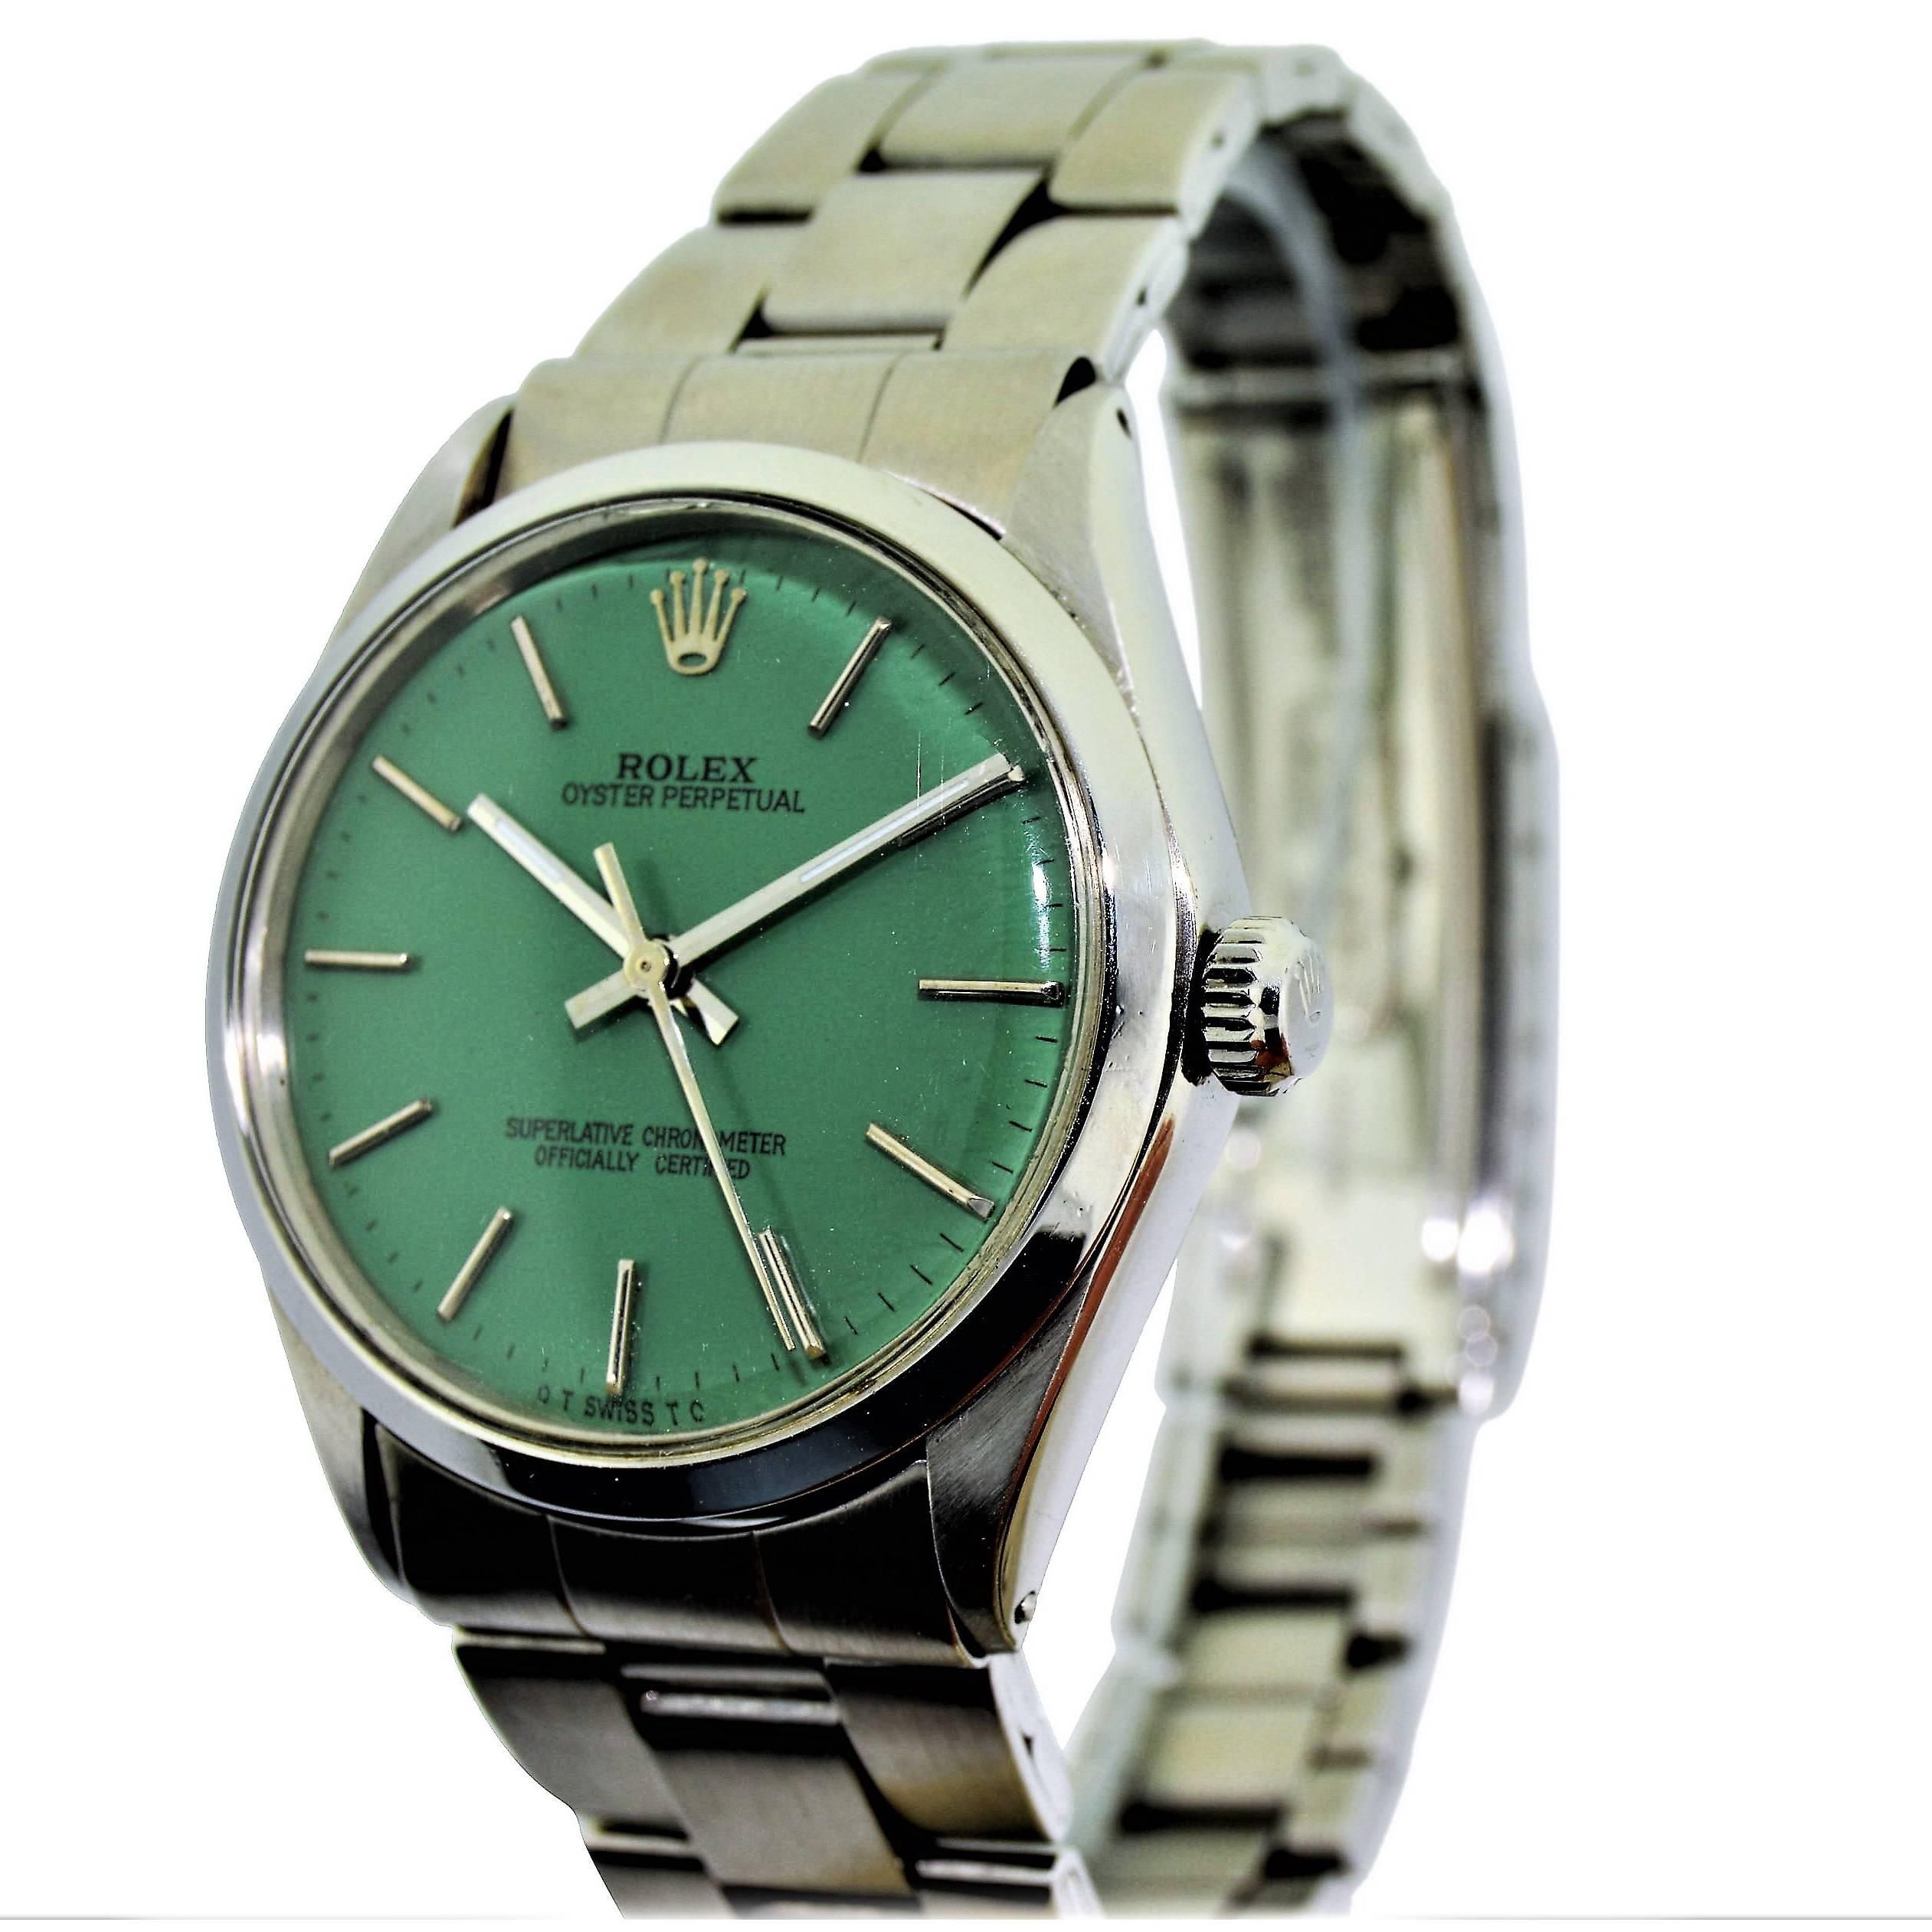 Rolex Stainless Steel Oyster Perpetual Wrist Watch